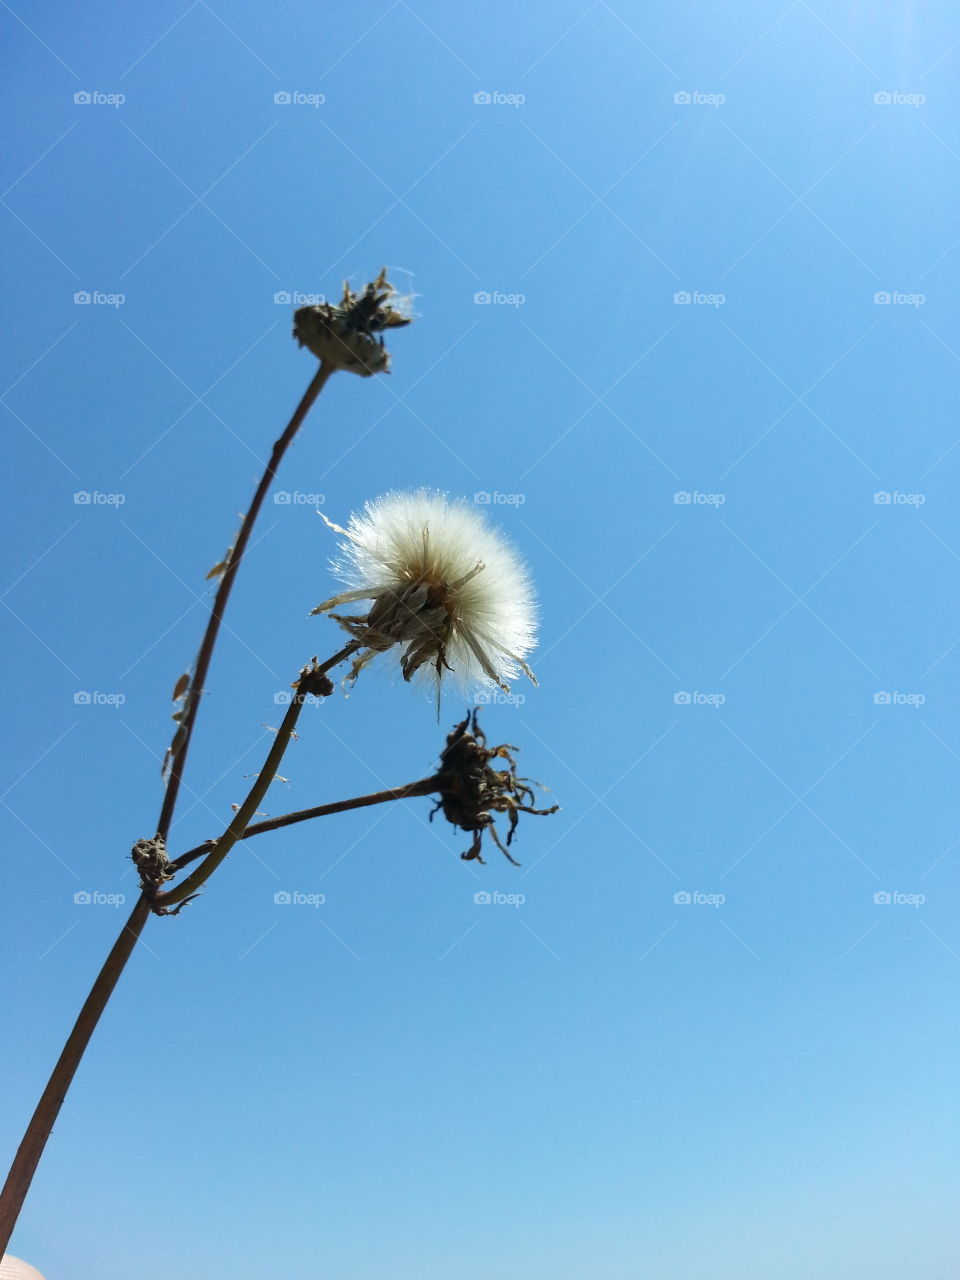 a sprig of dandelion against a clear blue sky